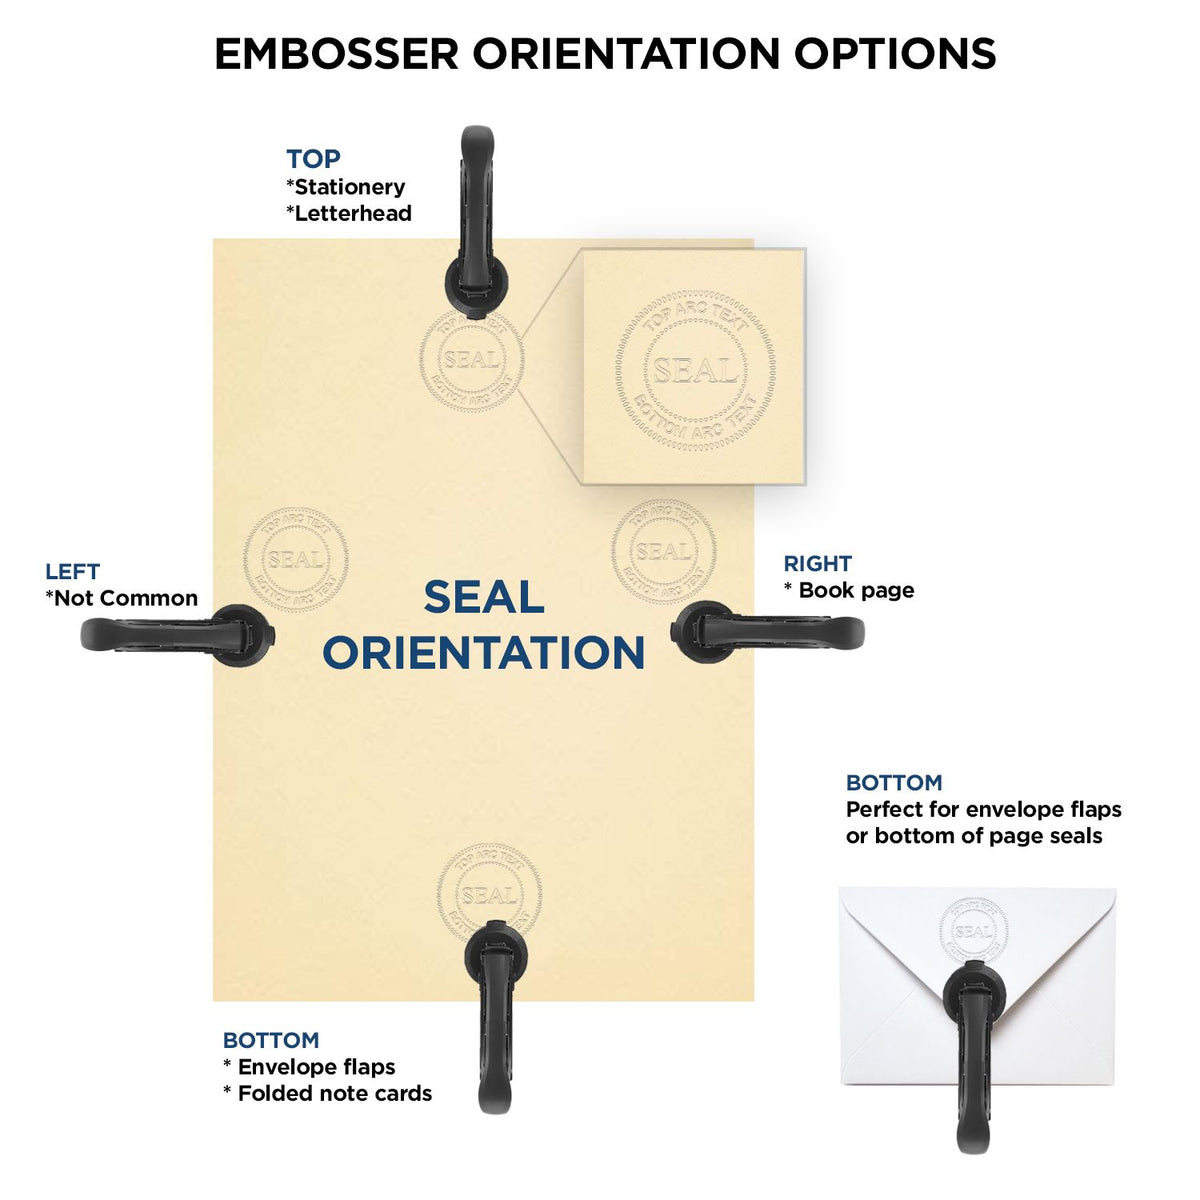 An infographic for the Heavy Duty Cast Iron Guam Engineer Seal Embosser showing embosser orientation, this is showing examples of a top, bottom, right and left insert.